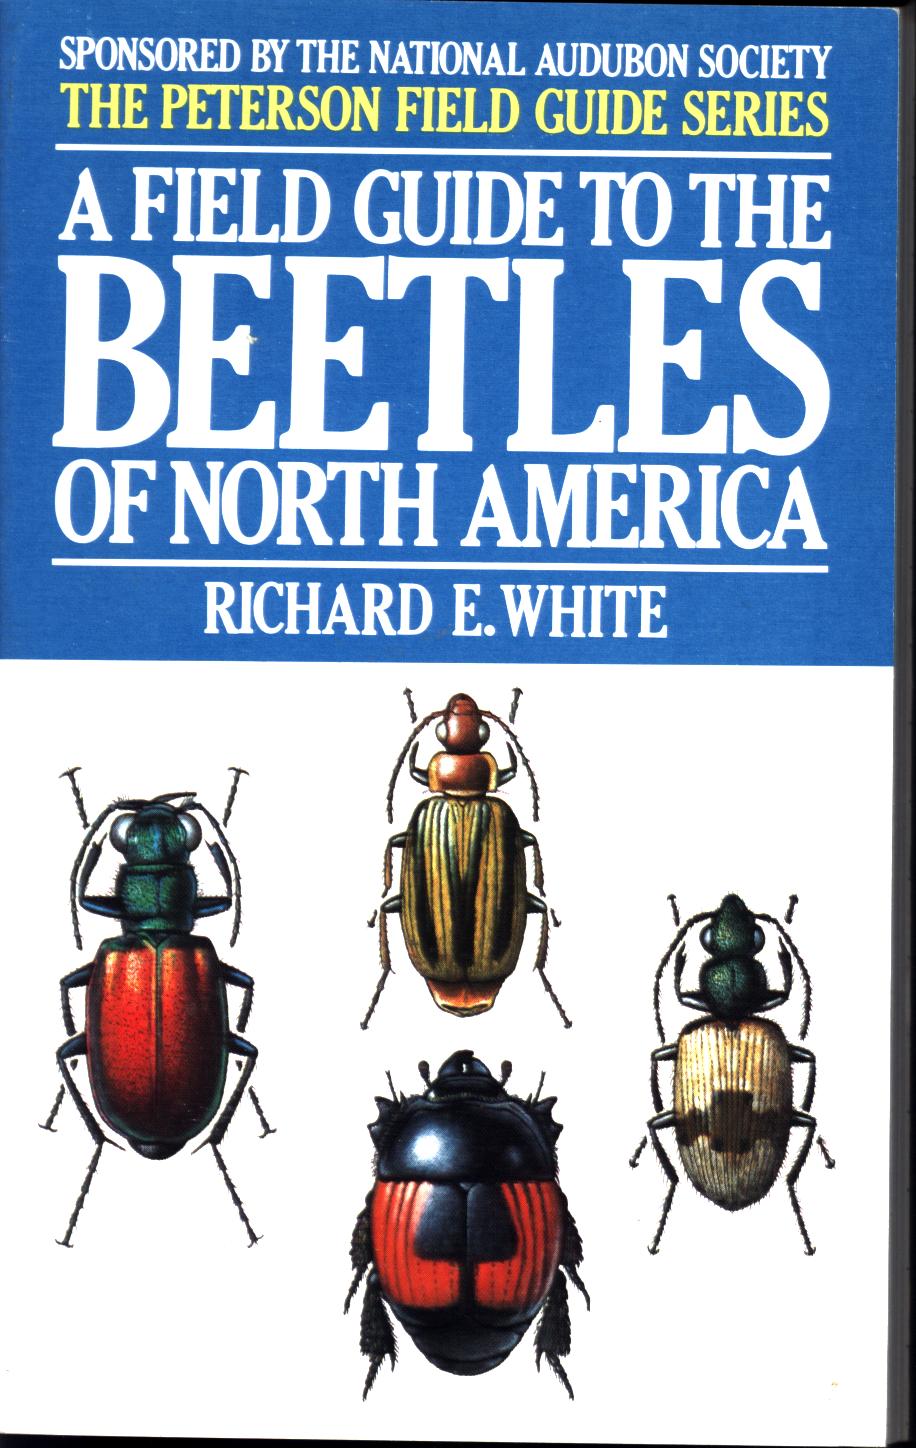 A FIELD GUIDE TO THE BEETLES OF NORTH AMERICA. 